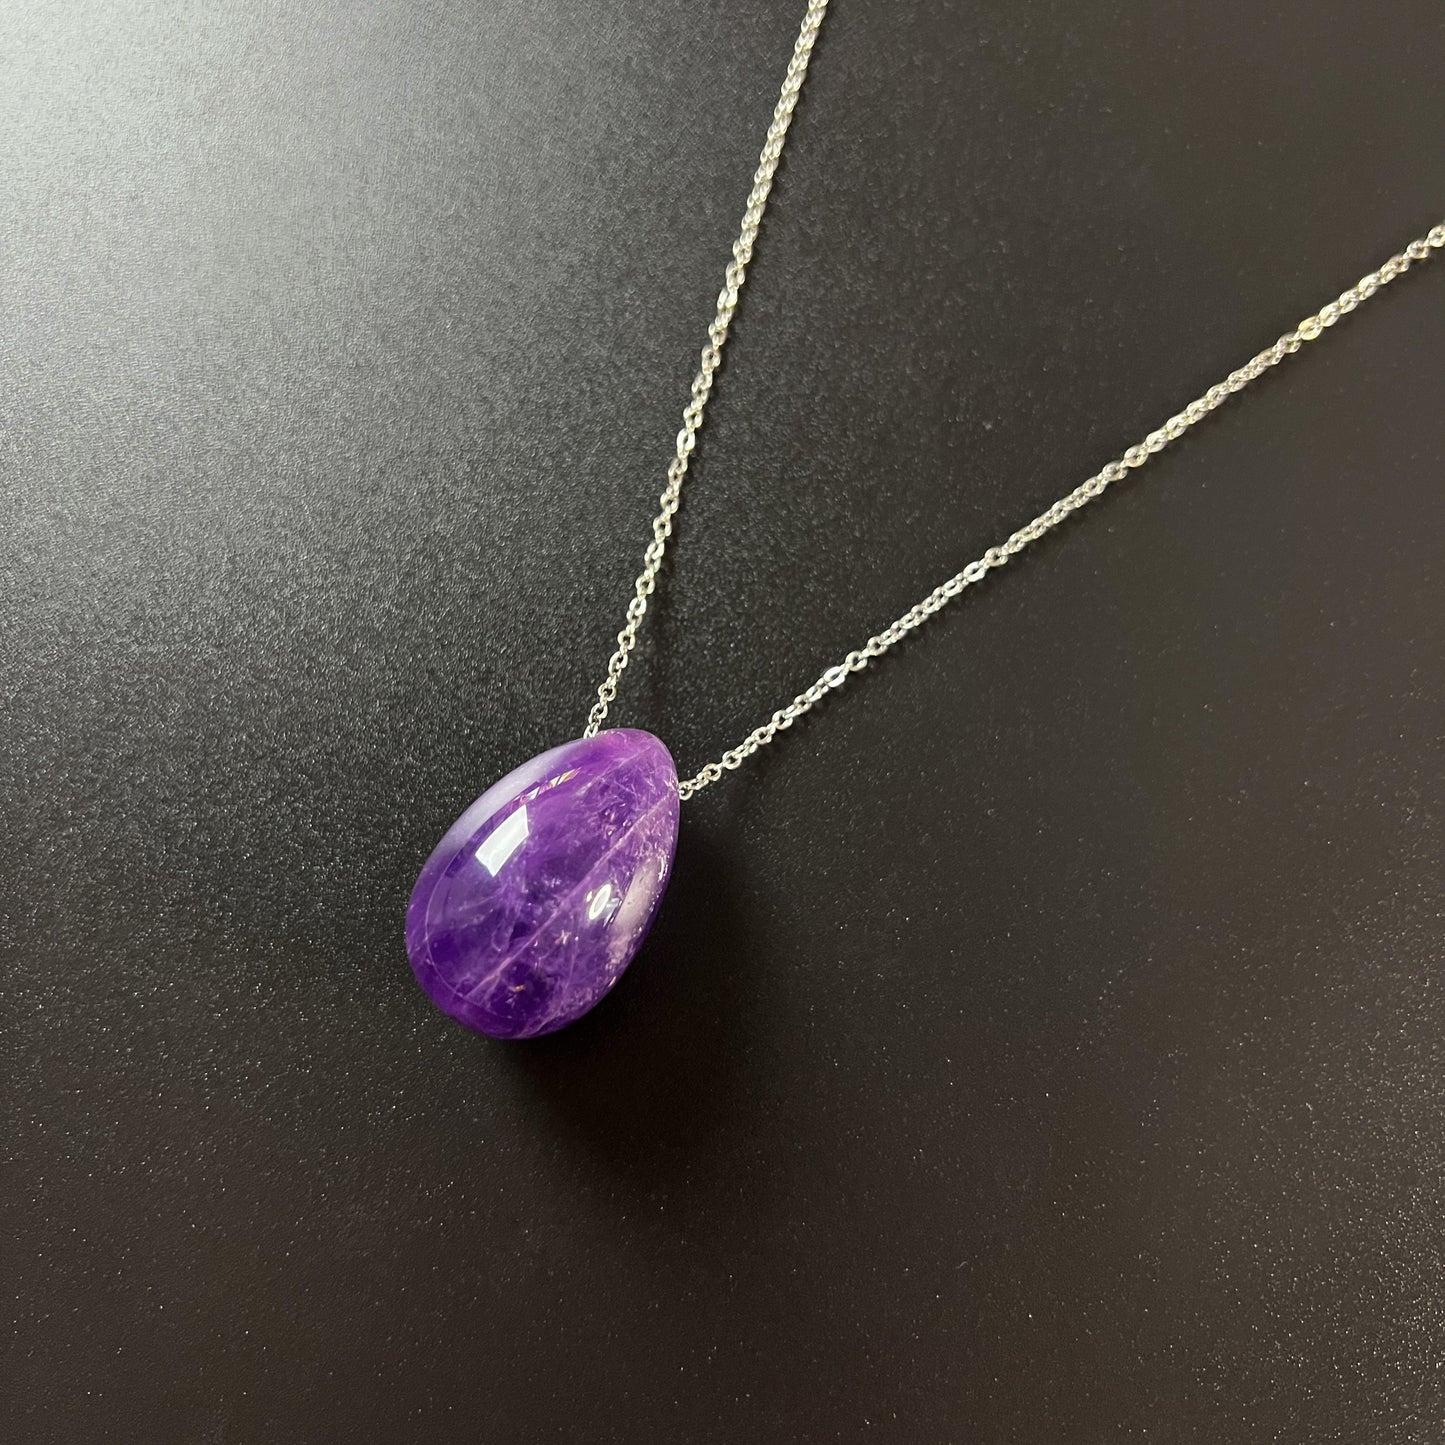 Amethyst gemstone egg and stainless steel necklace - The French Witch shop